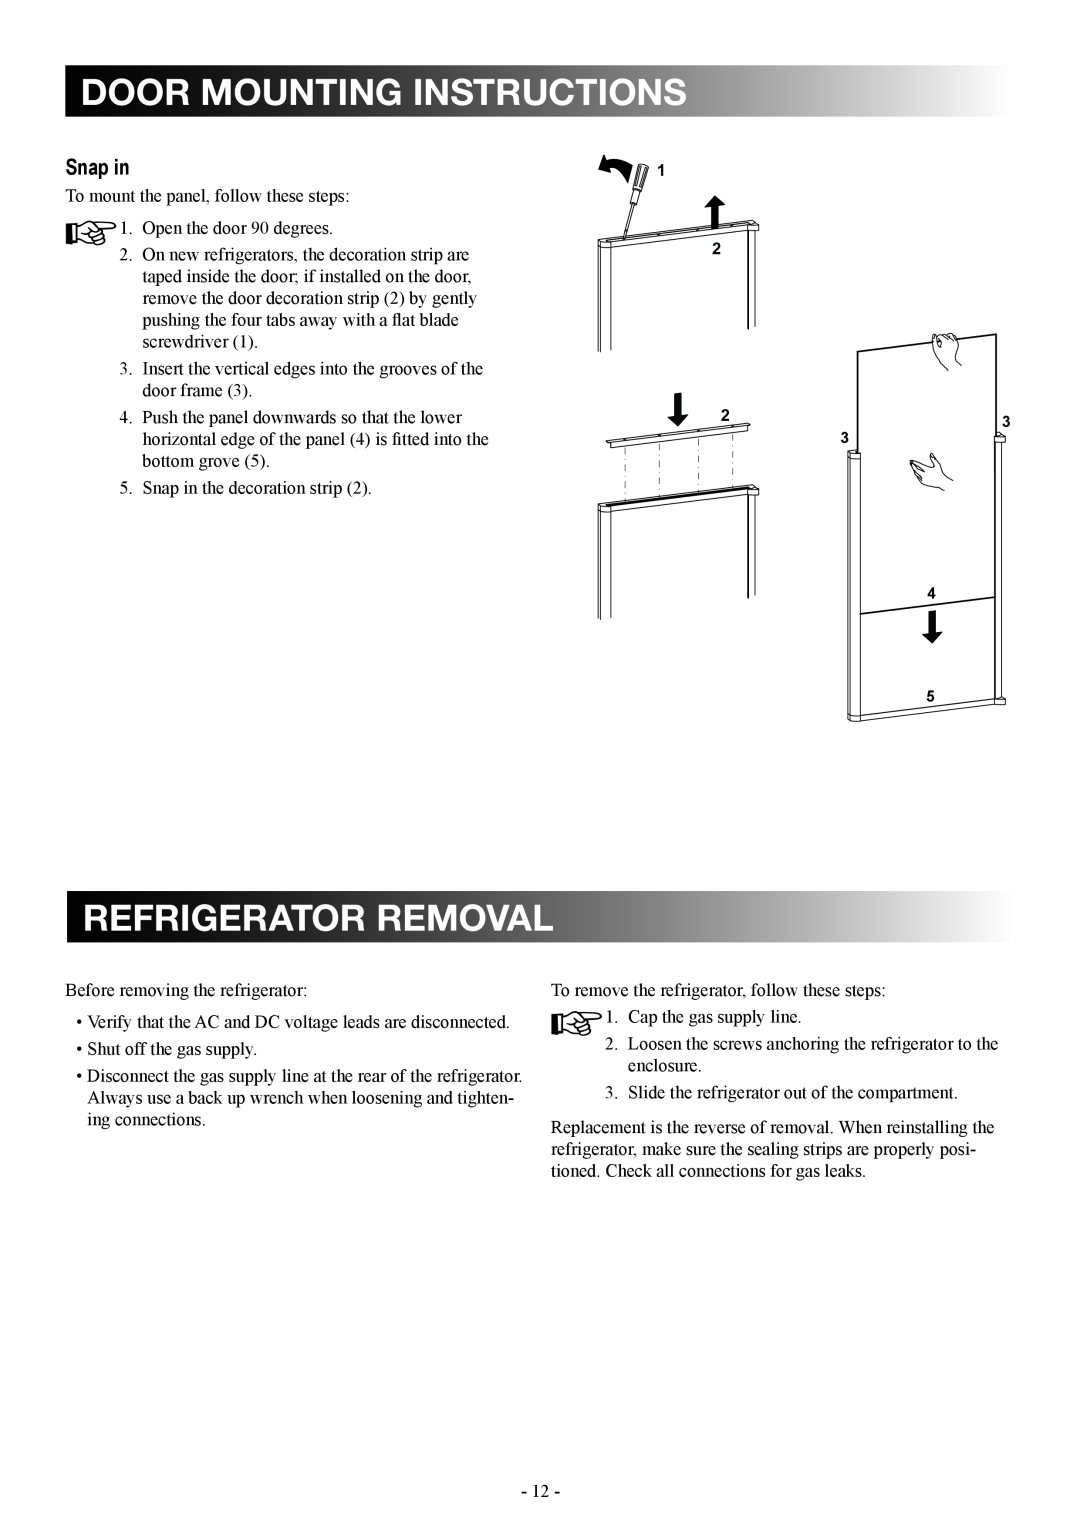 Dometic DM2862 manual refrigerator removal, door mounting instructions, Snap in, To mount the panel, follow these steps 